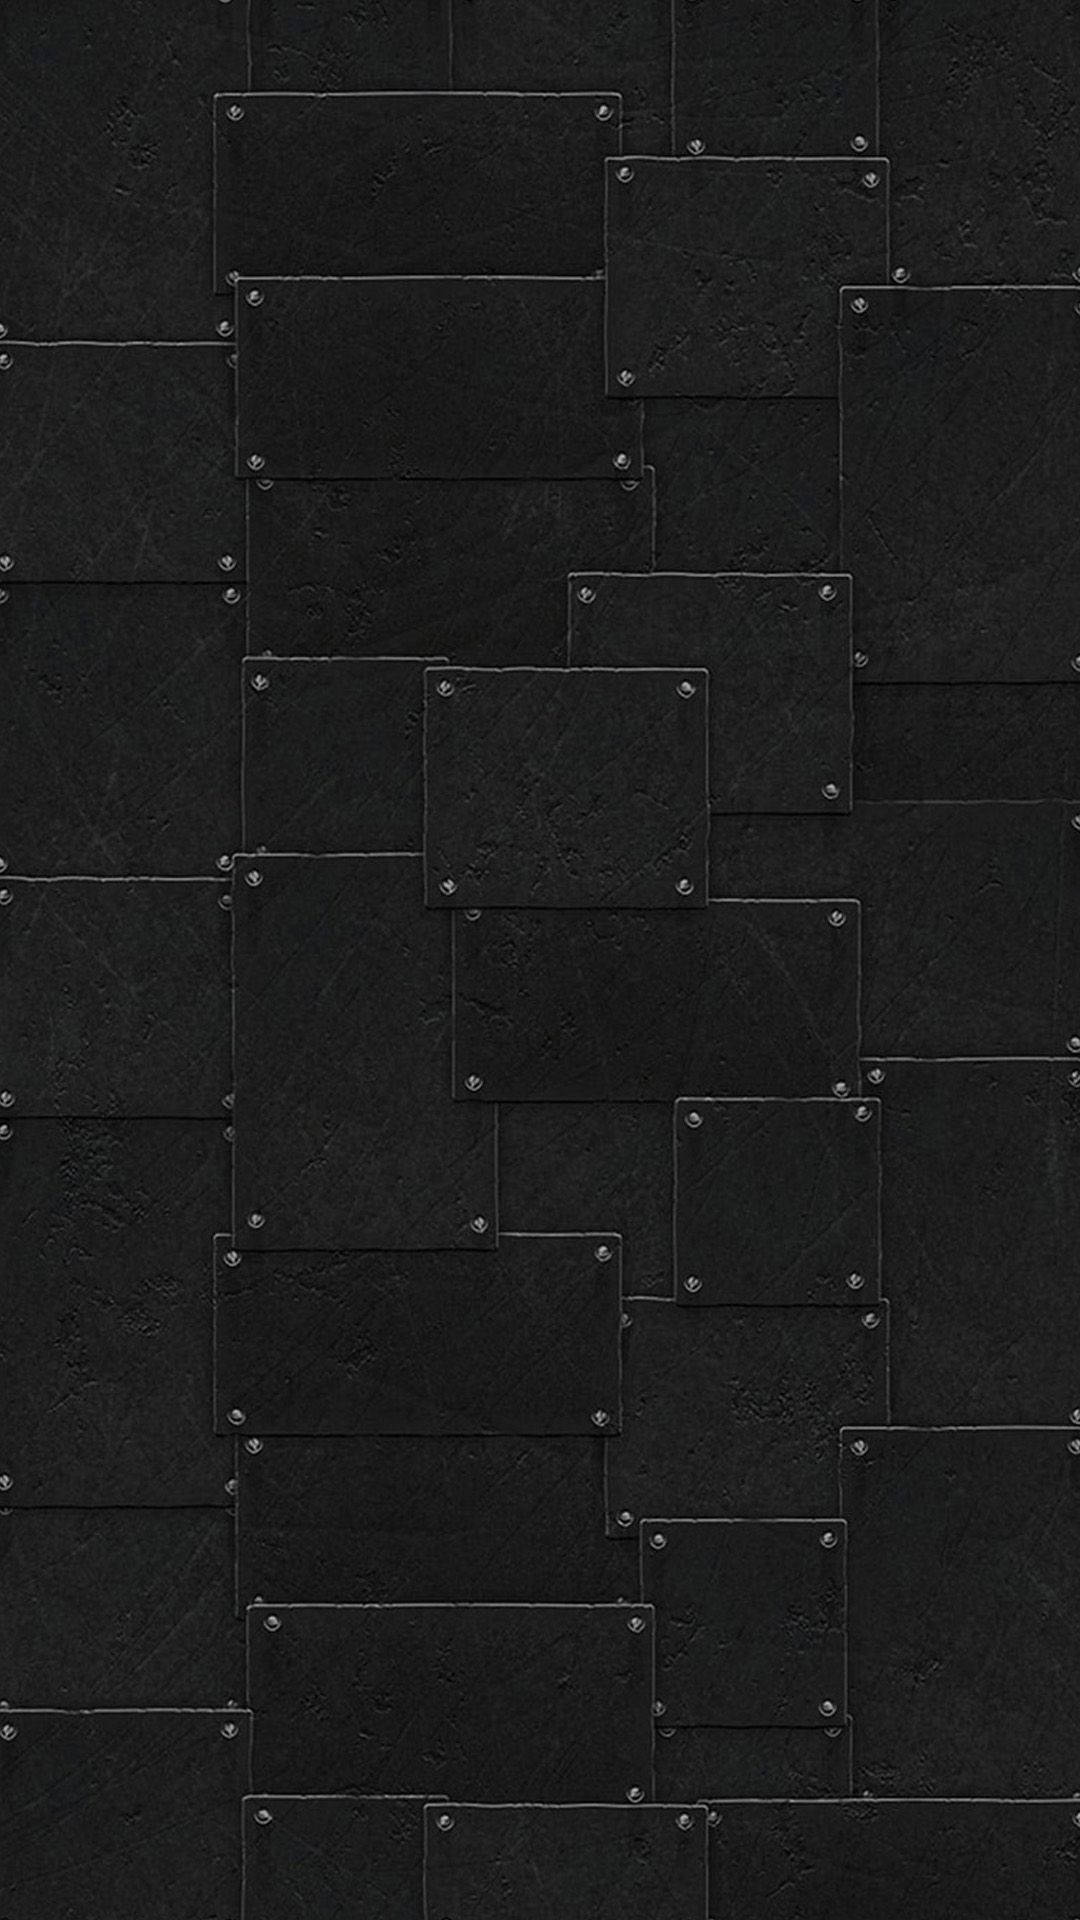 Patched-Up Black Leather iPhone Wallpaper